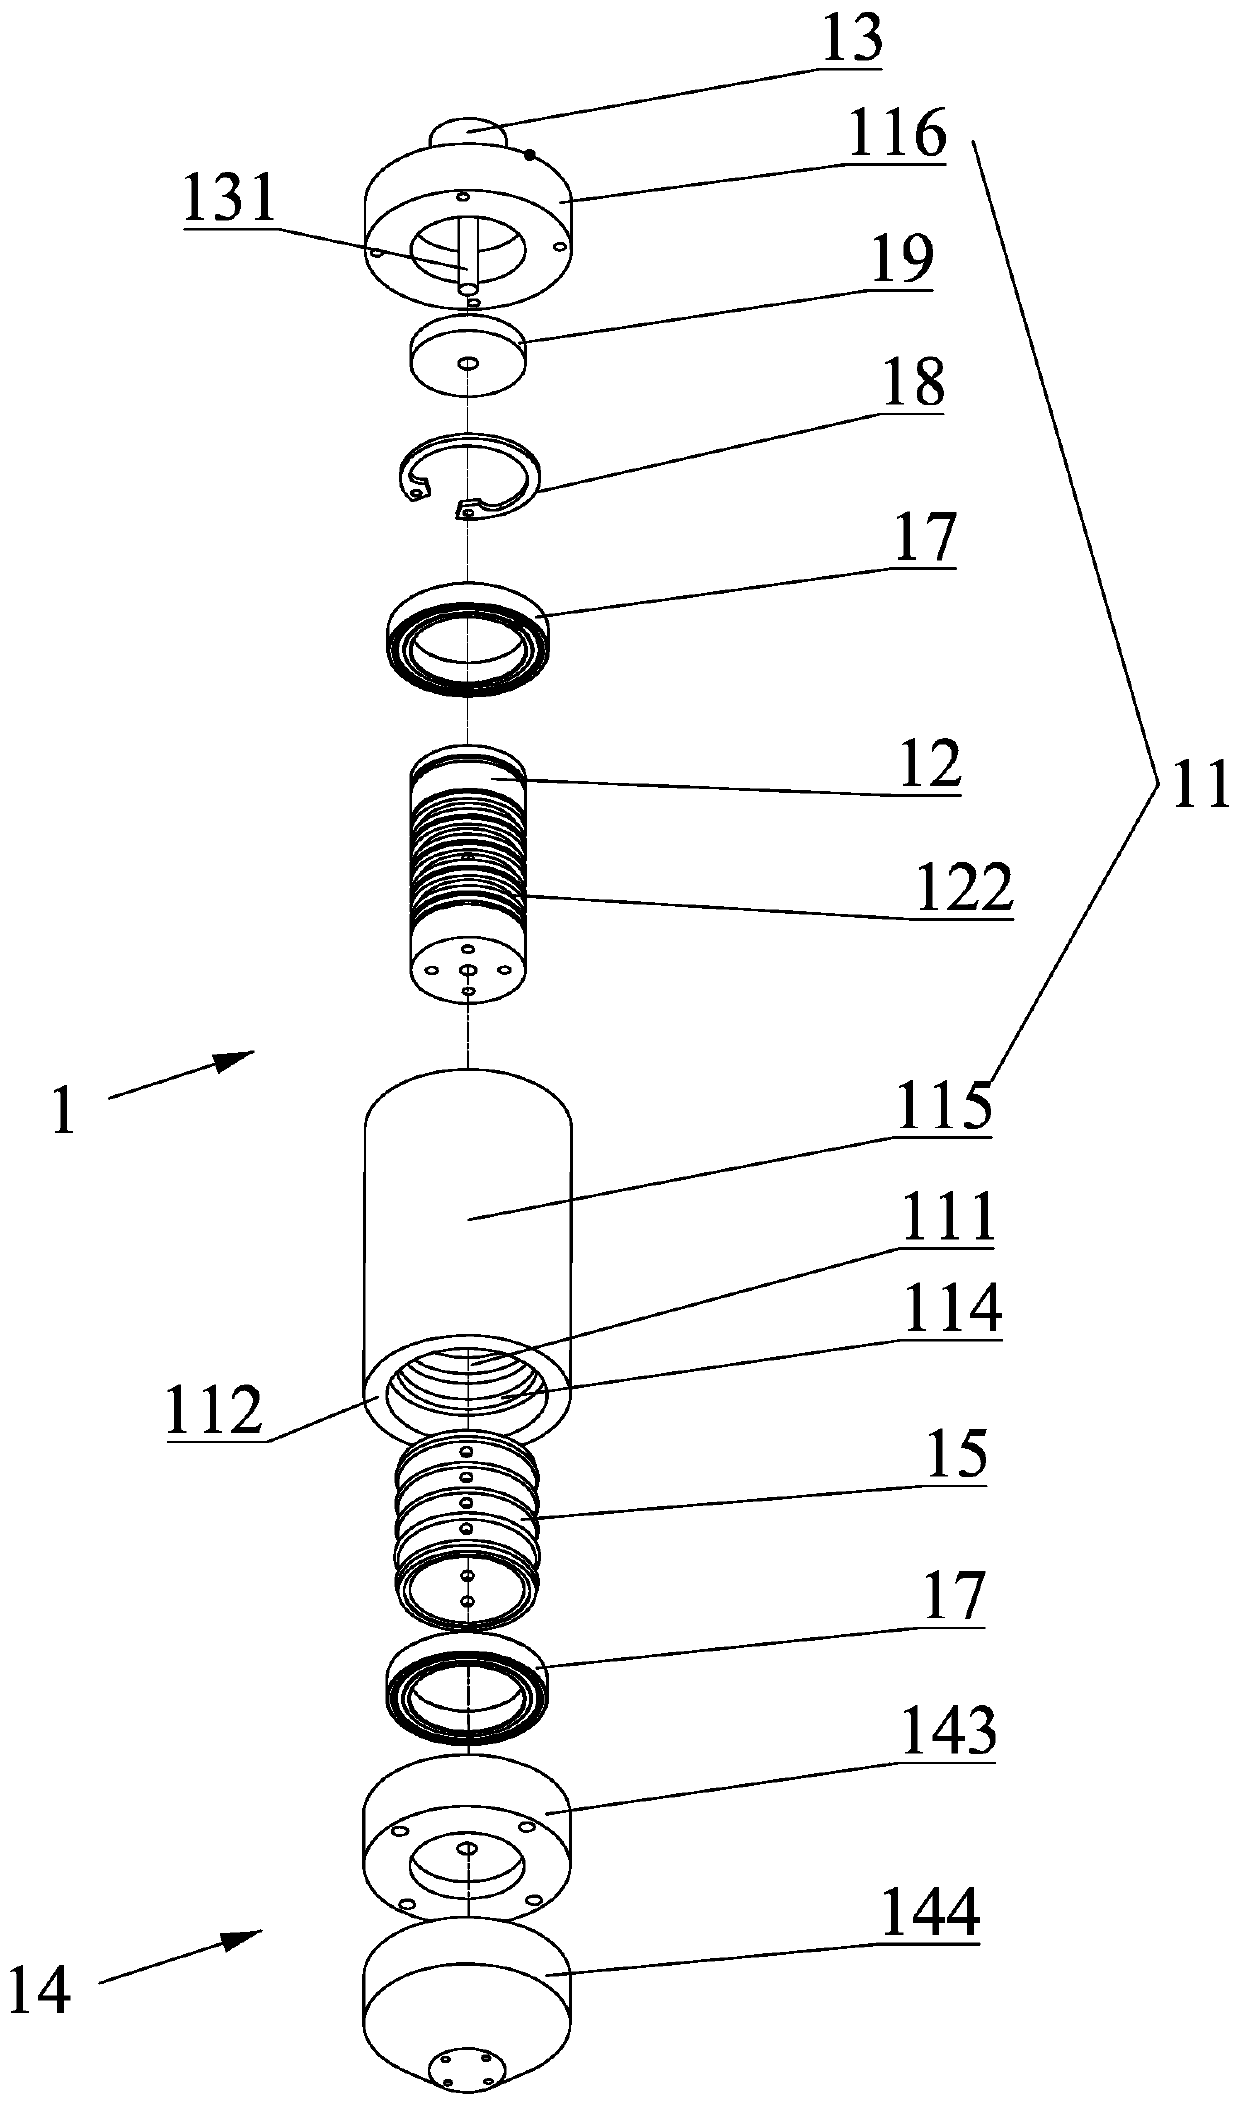 A multi-nozzle nozzle droplet spraying device